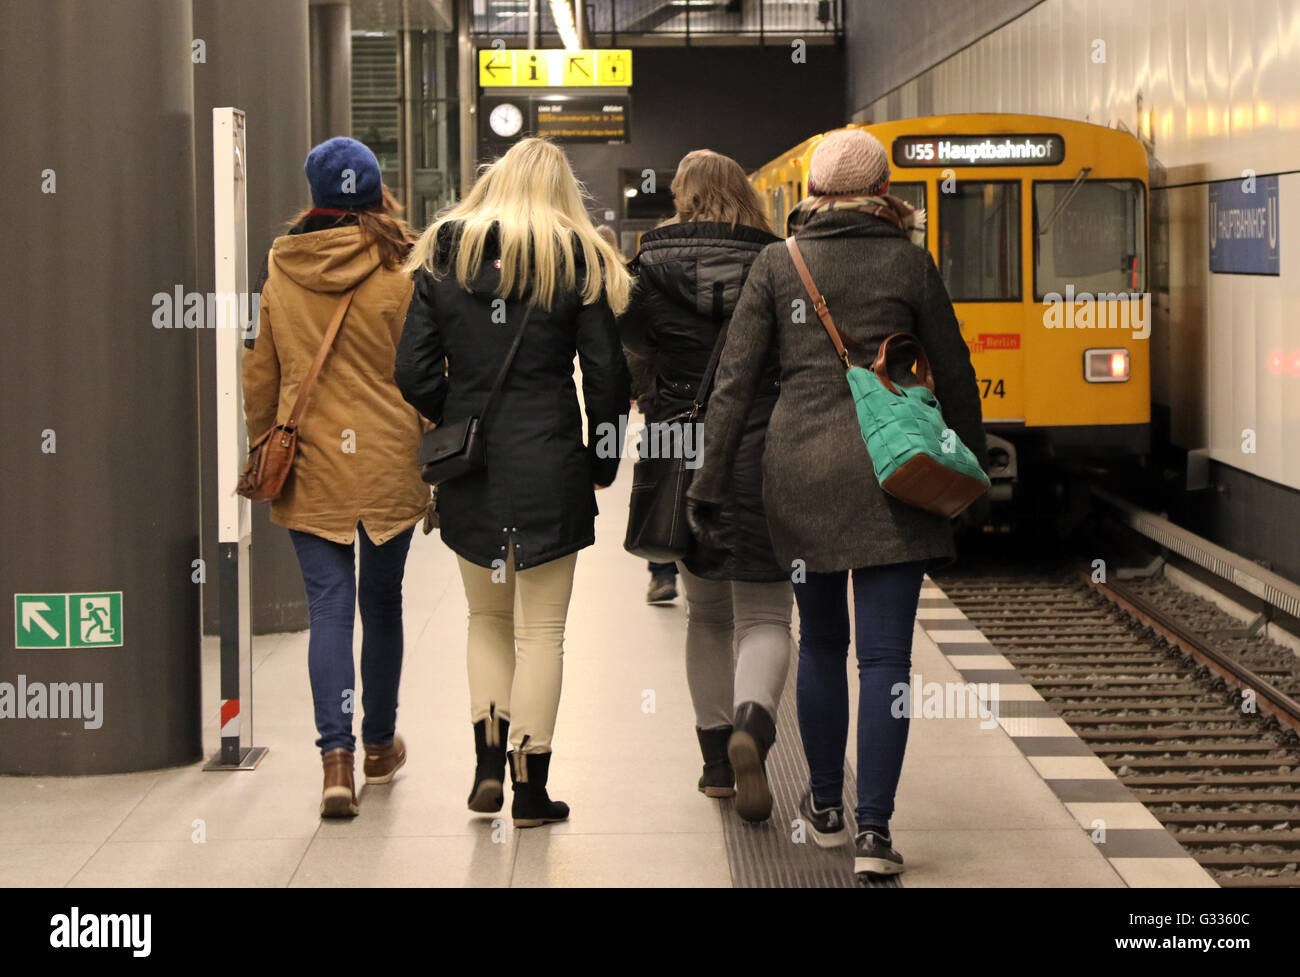 Berlin, Germany, young people on the platform of the subway line U55 in Hauptbahnhof station Stock Photo